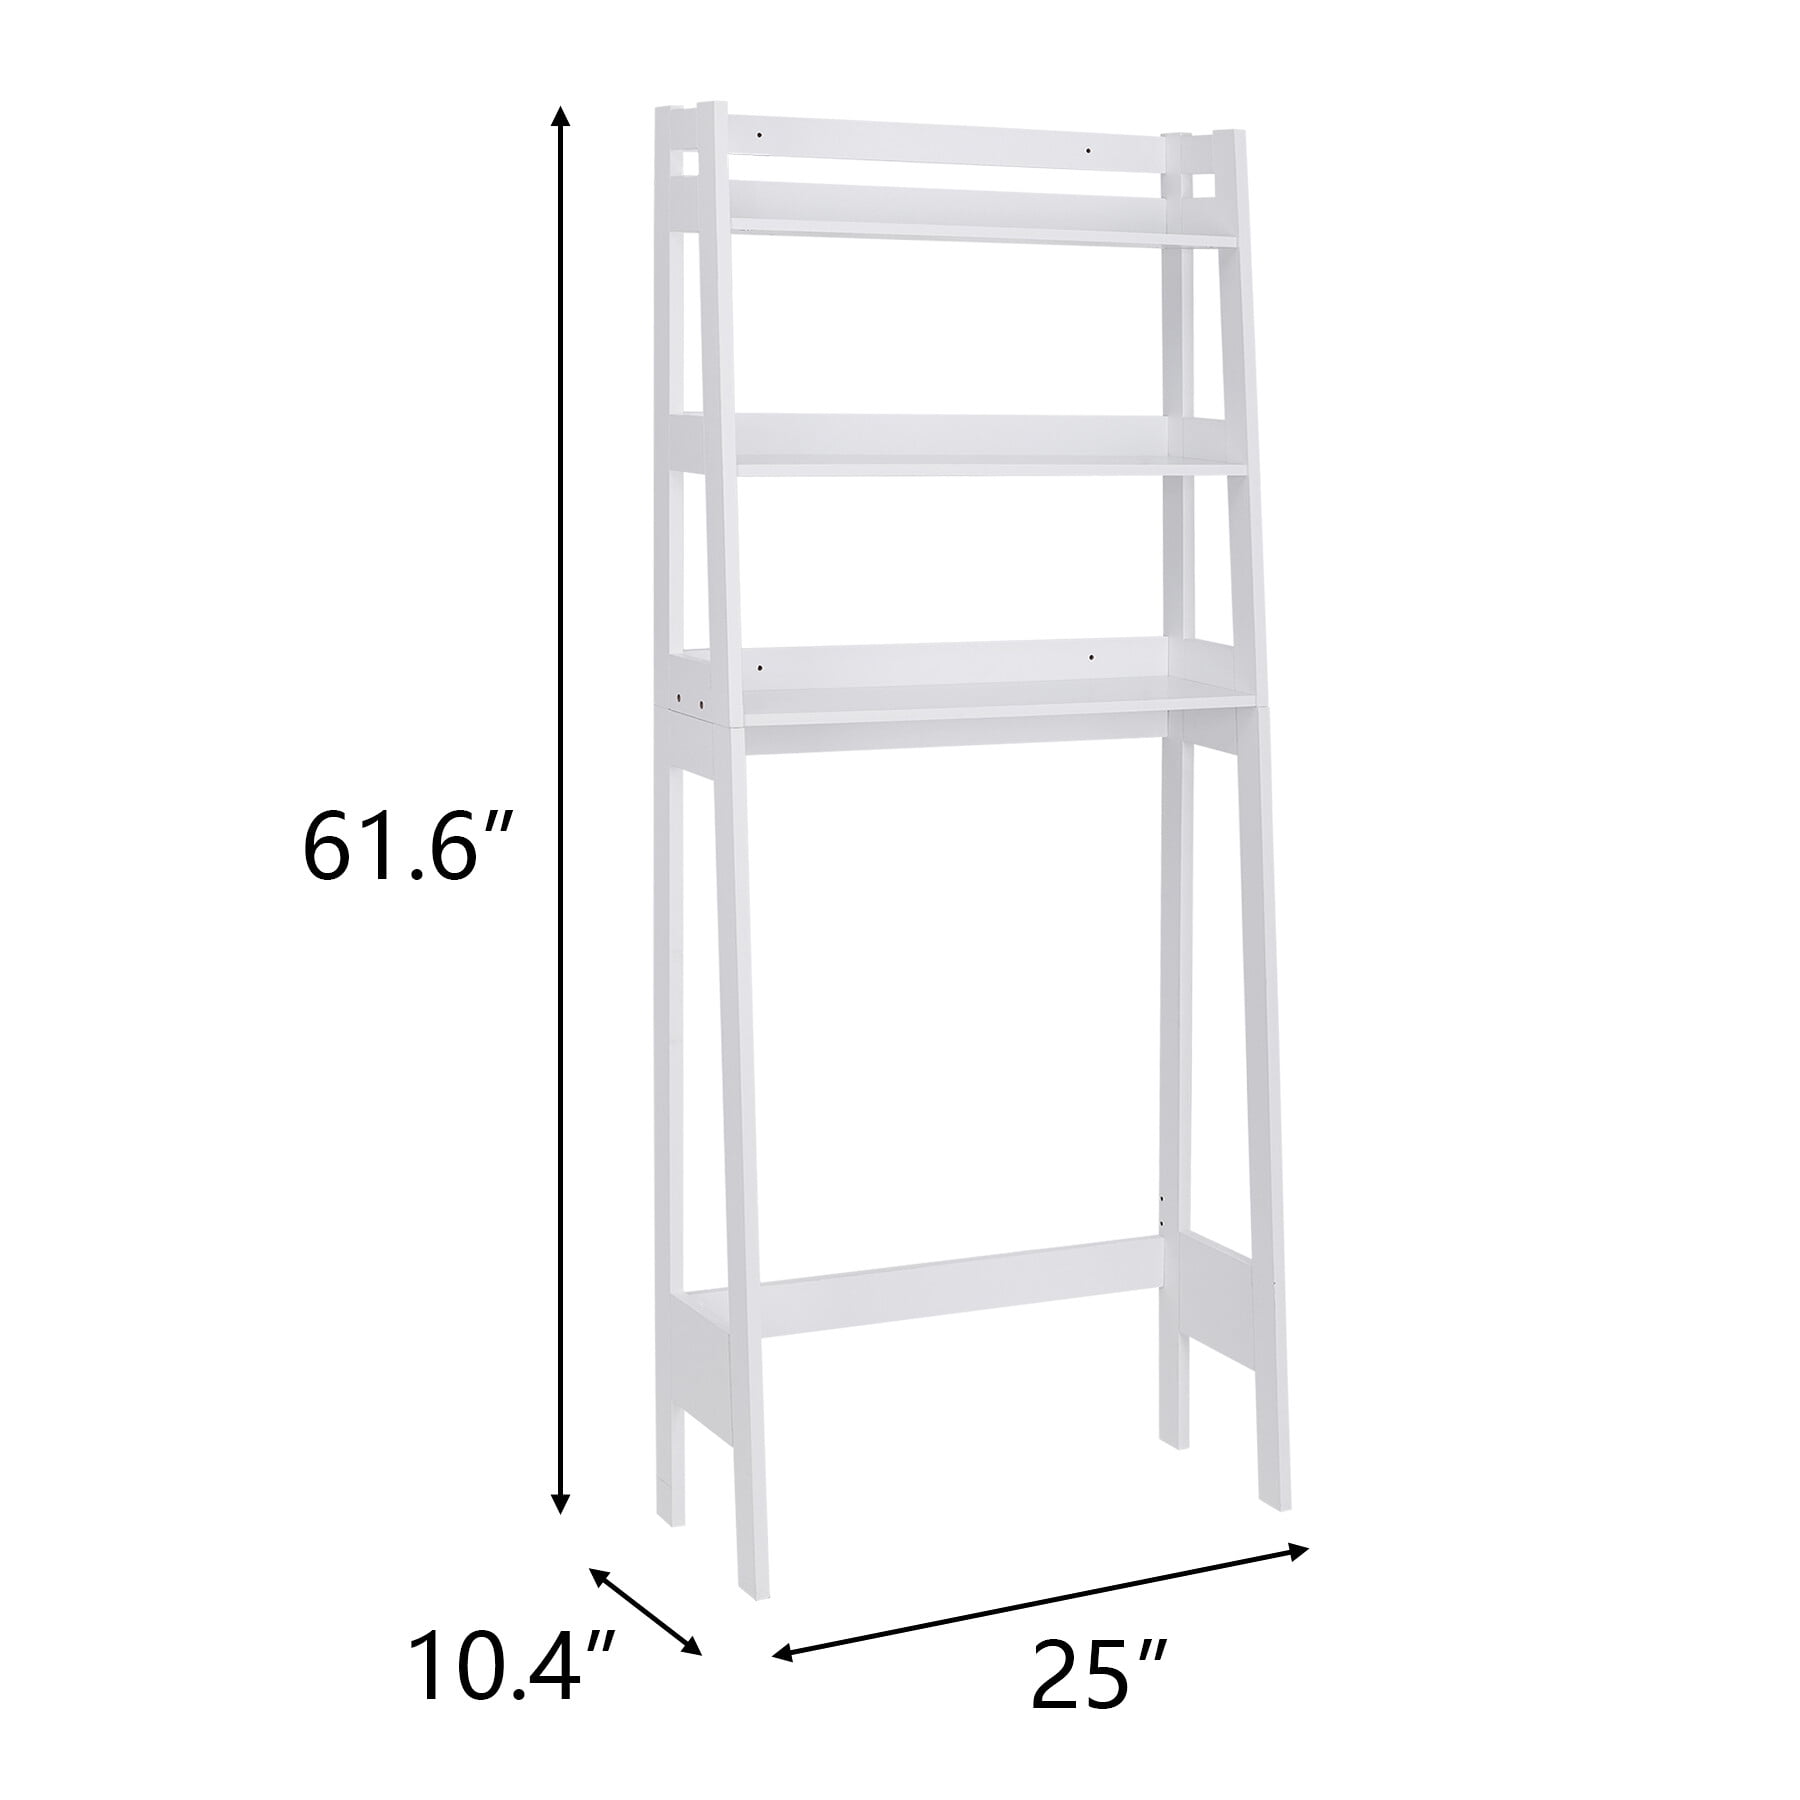 1pc Kitchen/bathroom/gap/any Room Storage Rack With Three/four Layers.  Rigorous, Durable And Beautiful. Easy Installation And Demountable. The  Wheels Have Buckles To Keep It Even With Heavy Objects. Ideal For Narrow  Spaces And